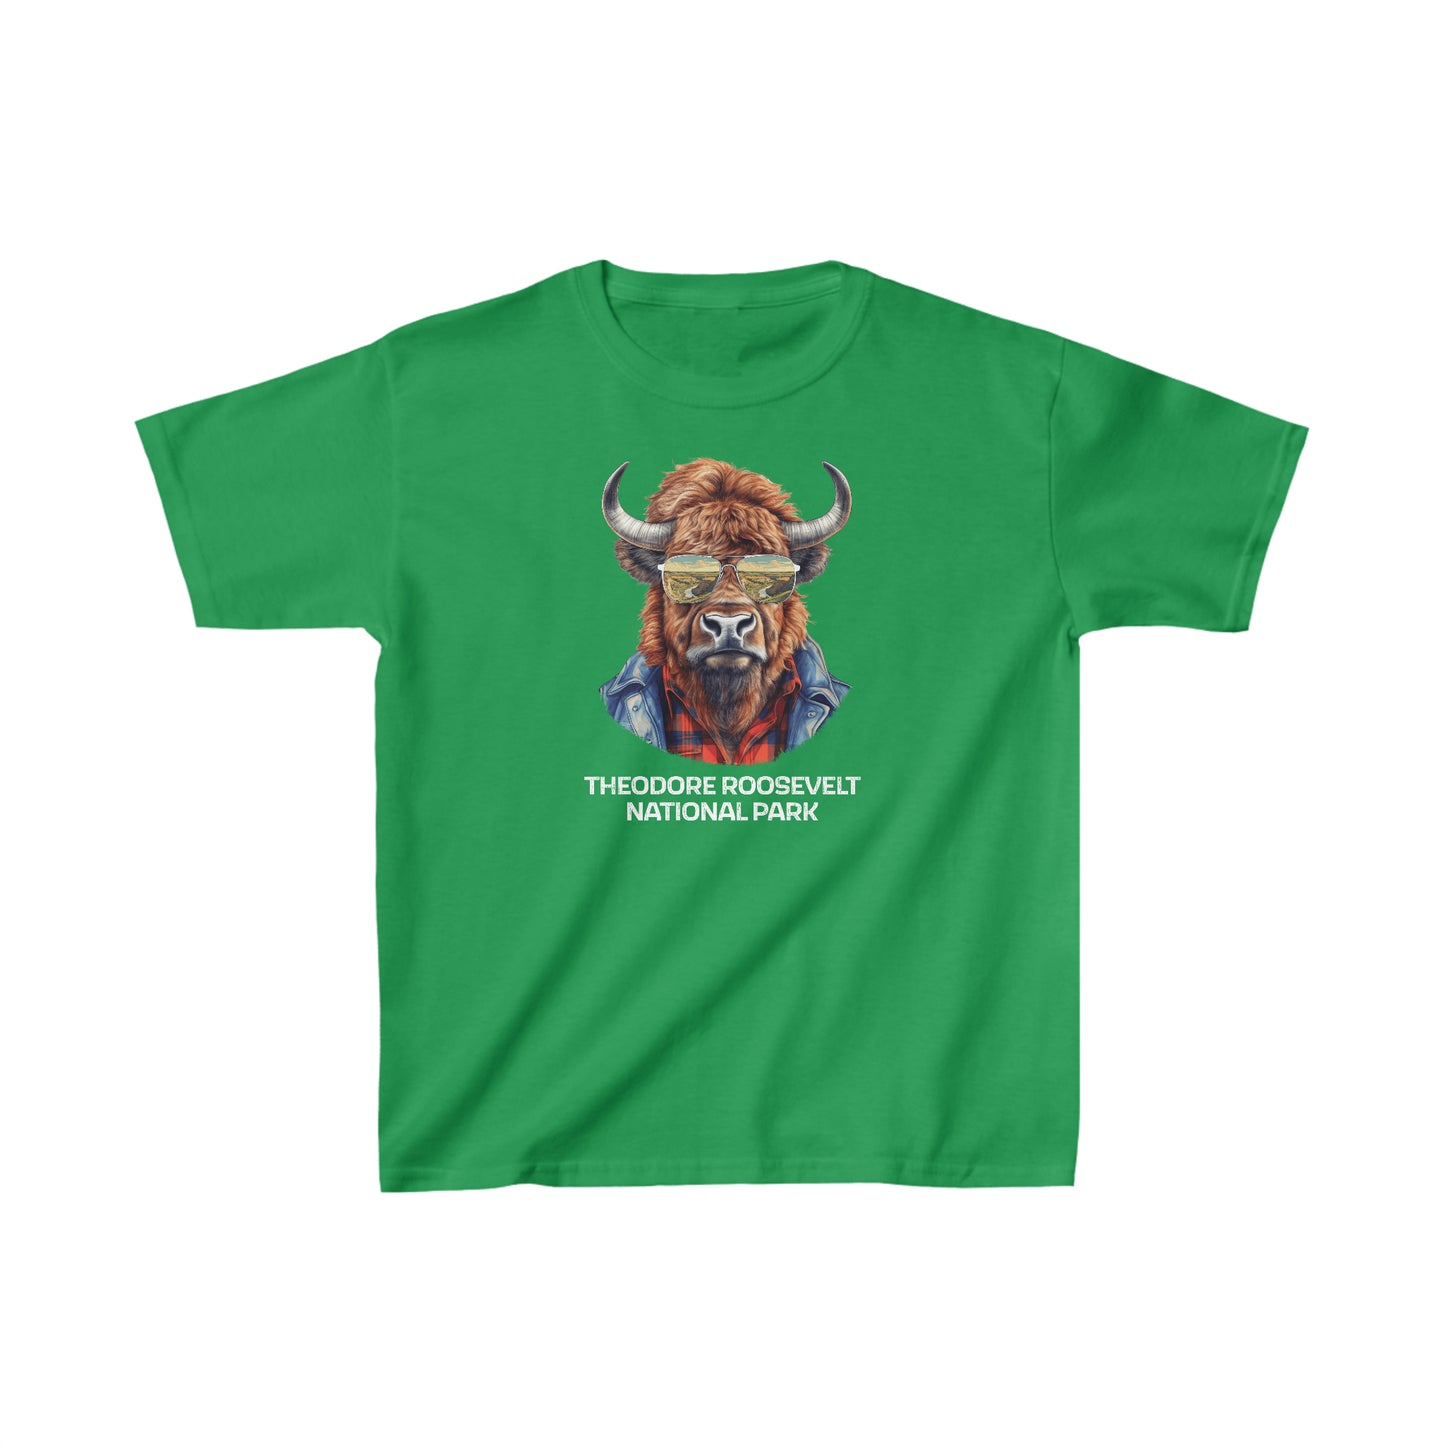 Theodore Roosevelt National Park Child T-Shirt - Cool Bison